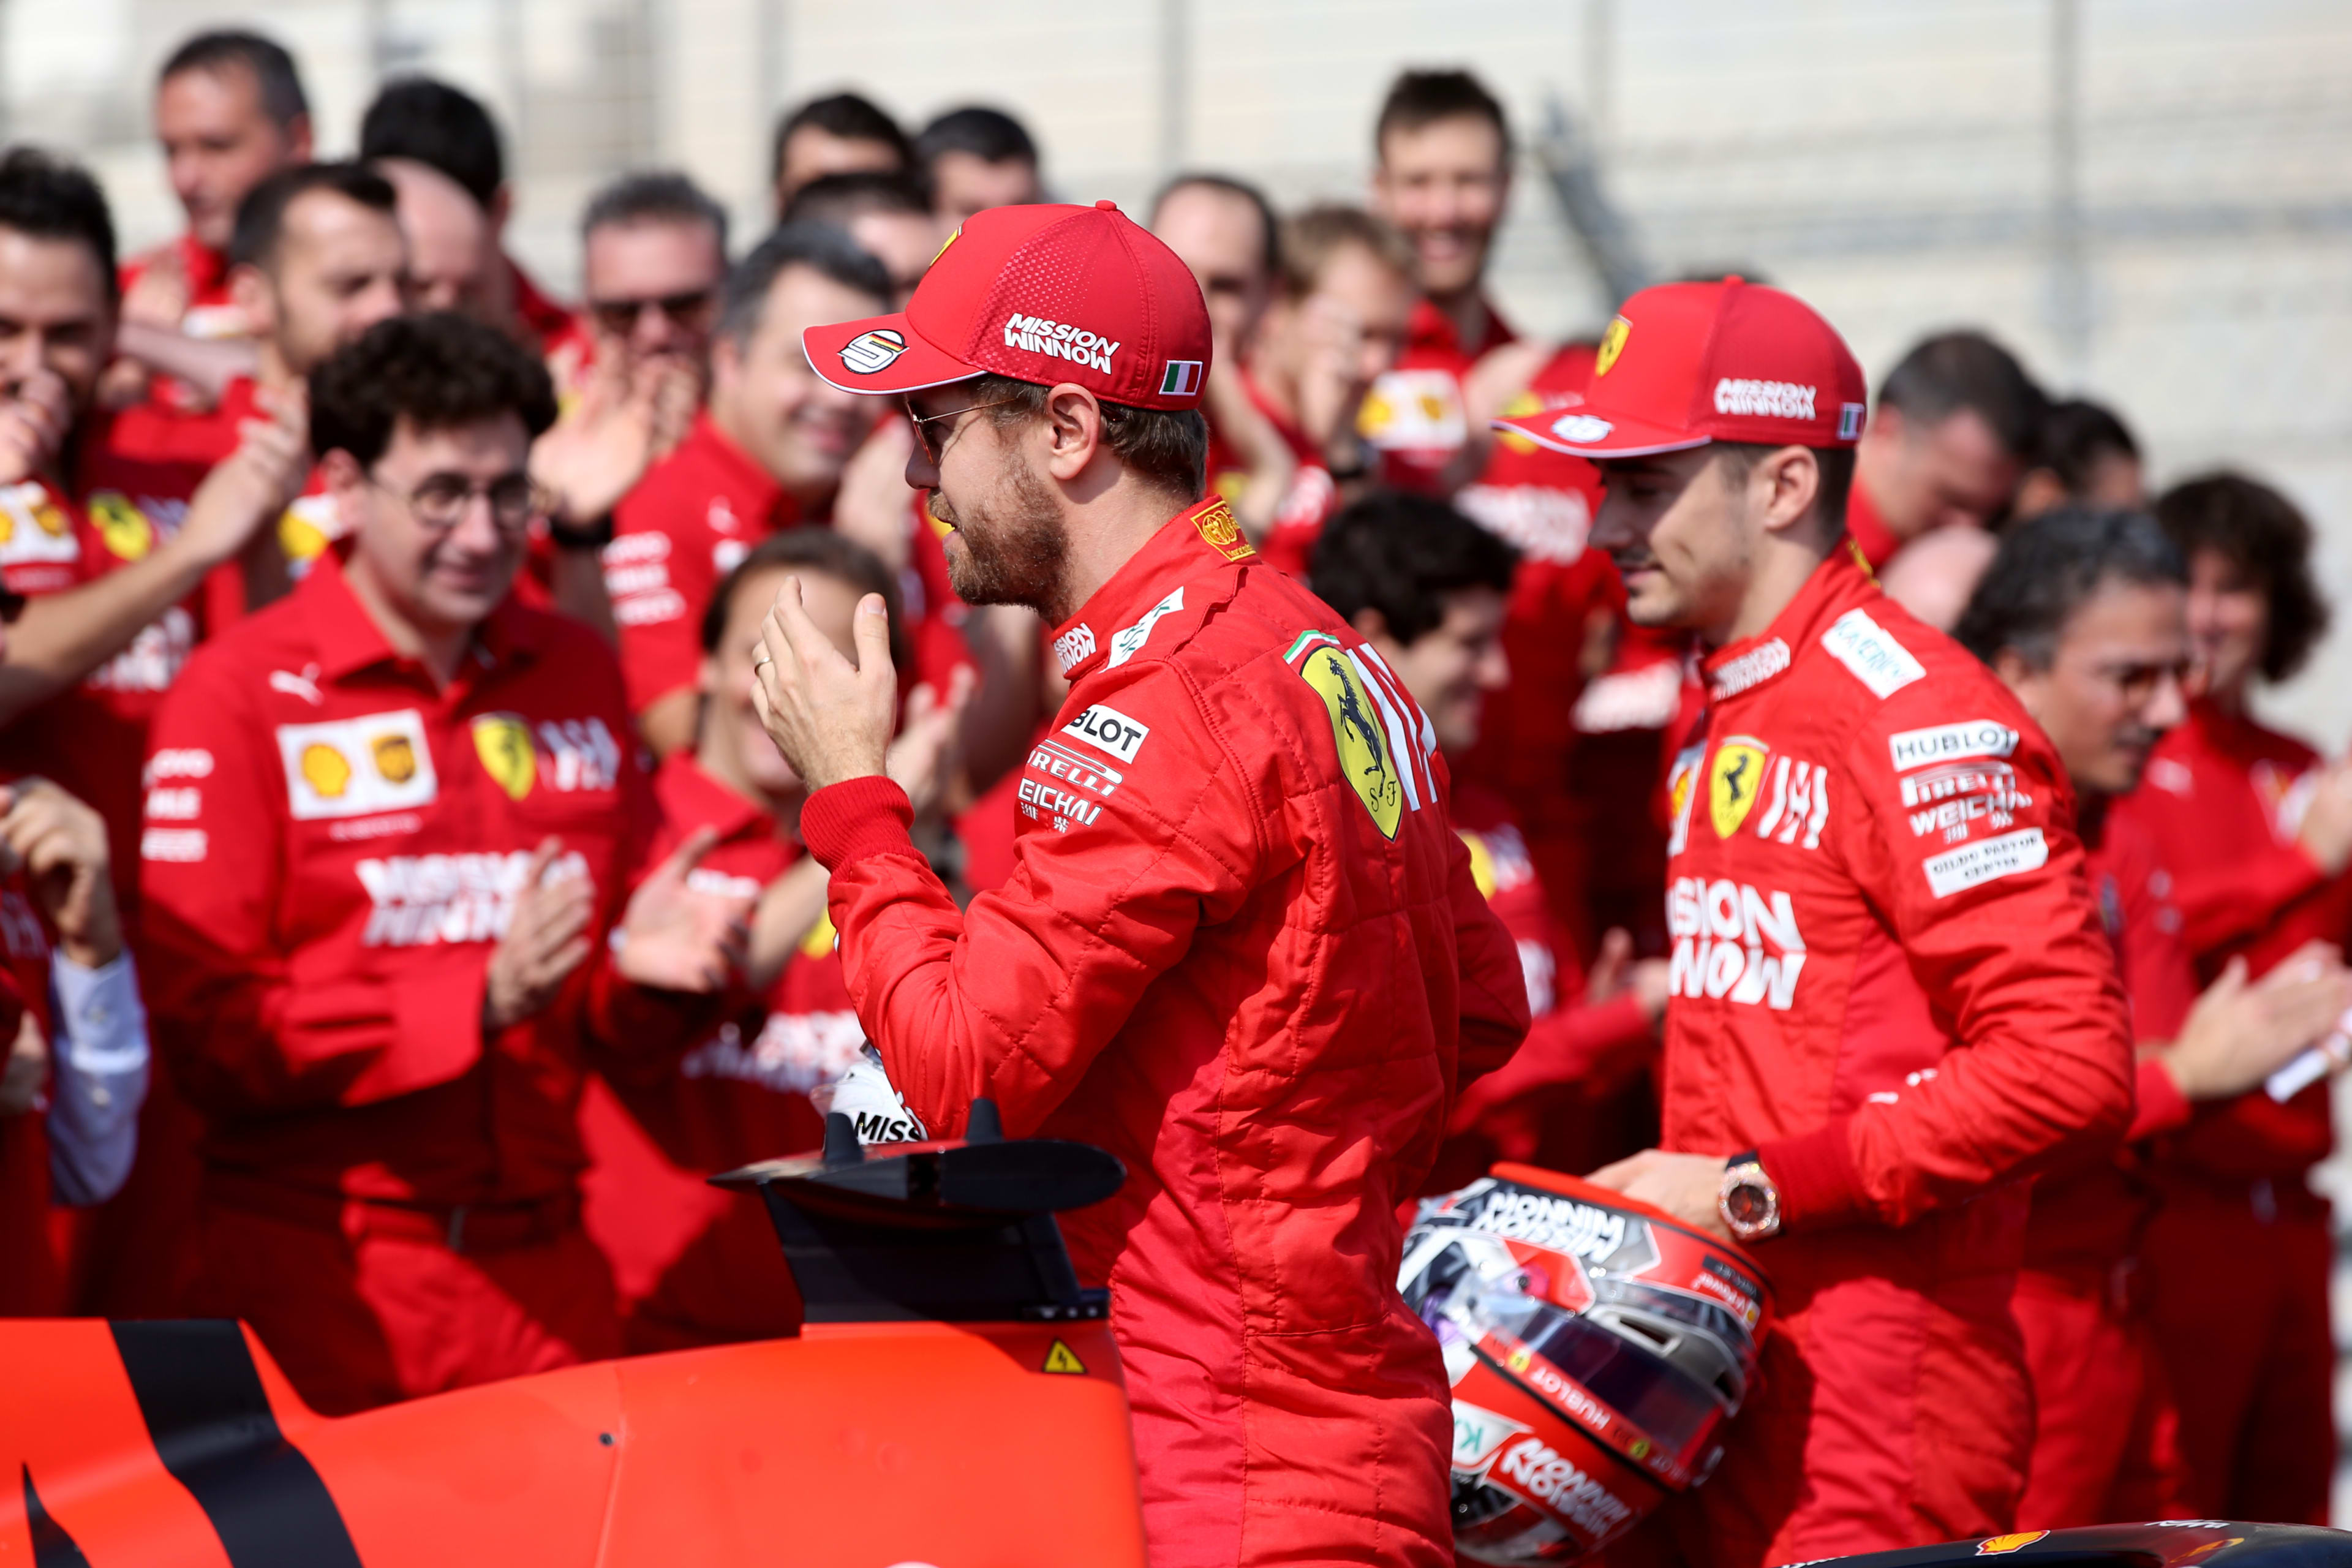 Bare hostel prince Why 2020 could be Ferrari's year | Formula 1®